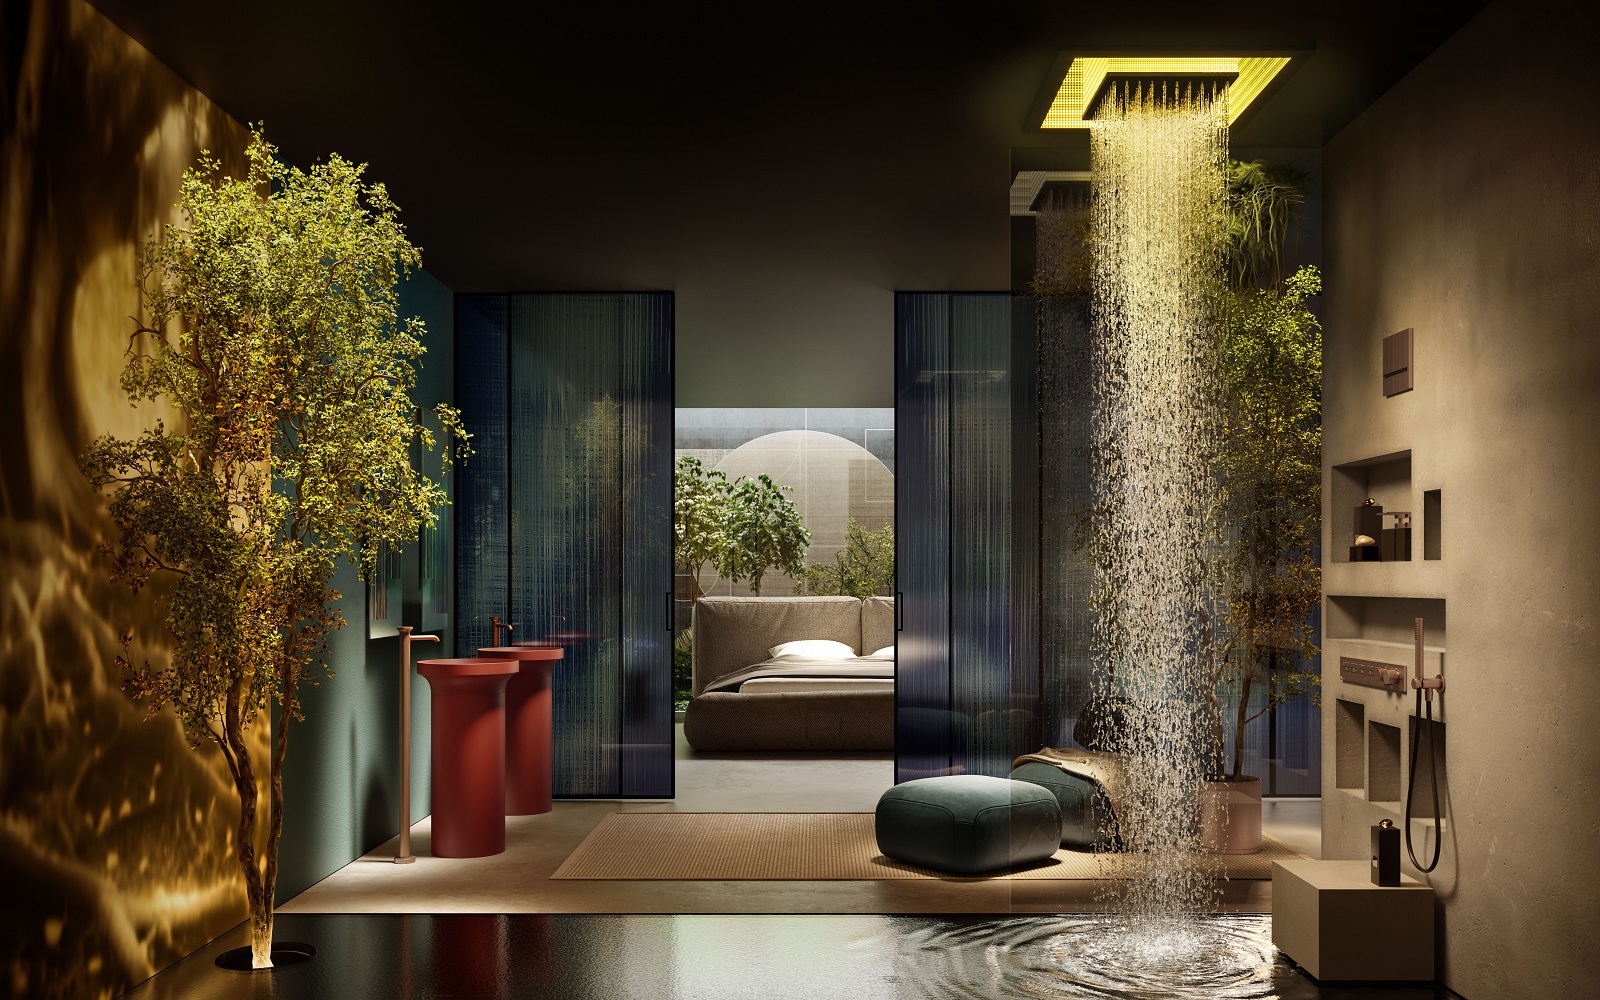 bathroom and shower installation featuring Sogni by Gessi